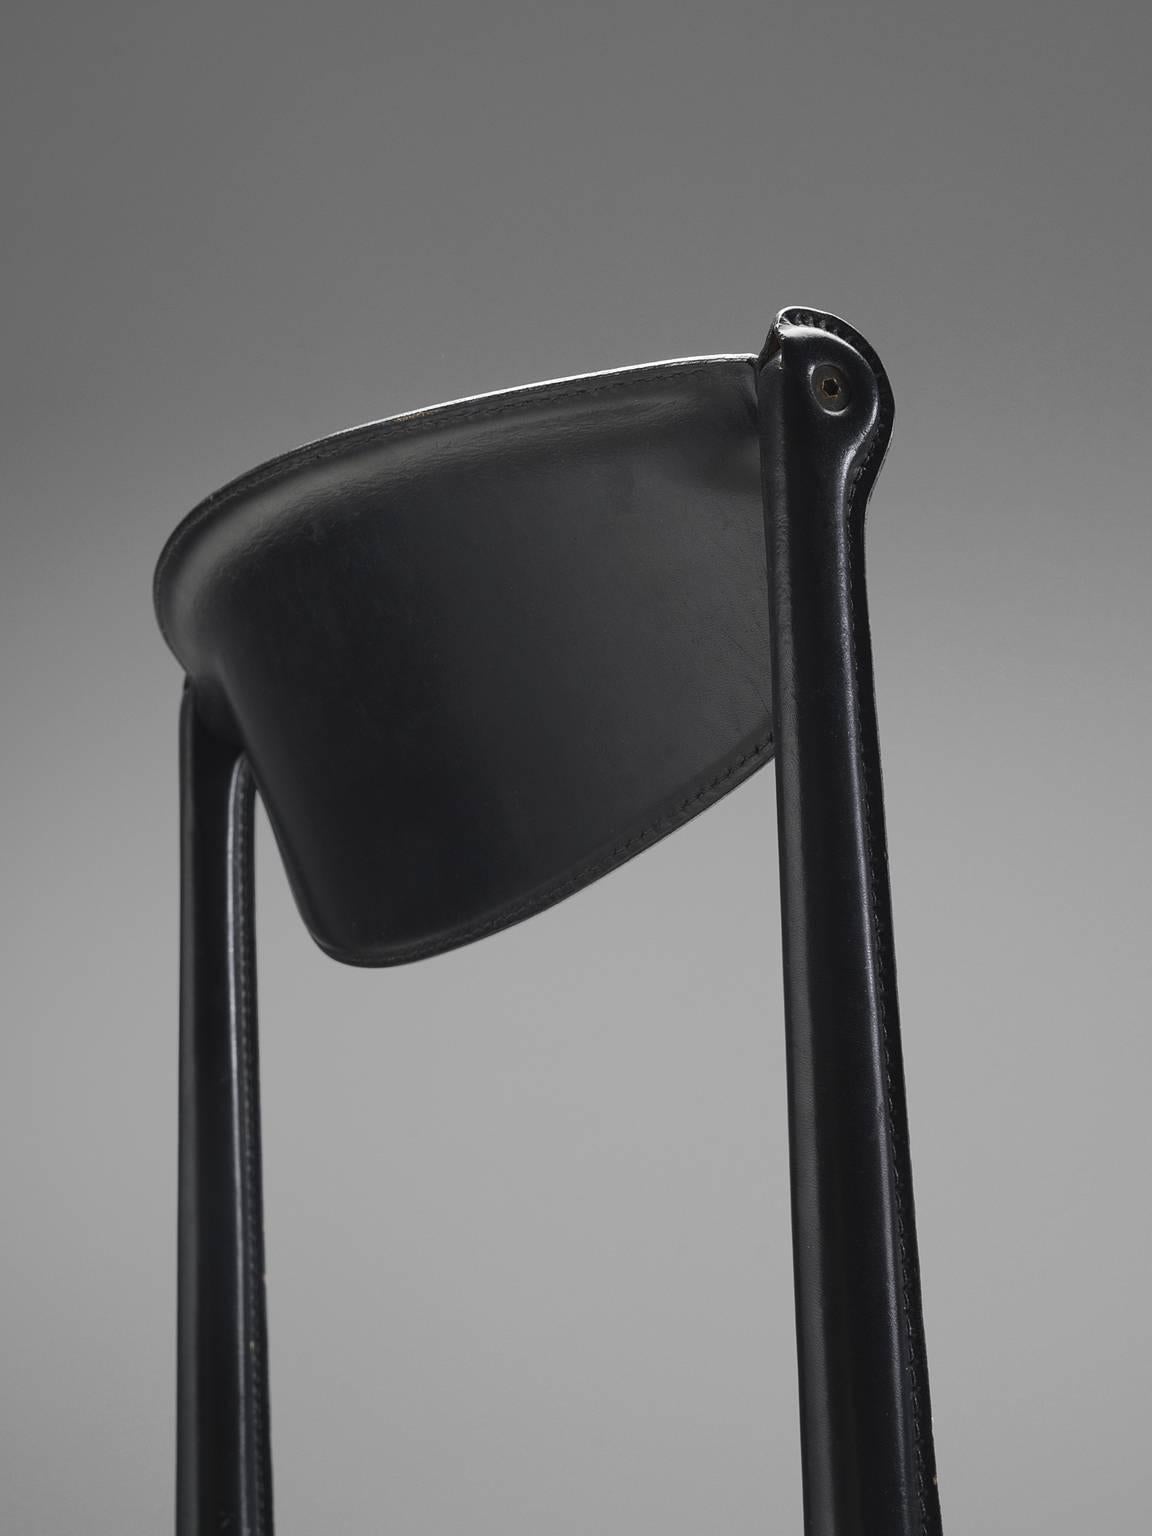 Metal Matteo Grassi Set of Four Black Leather Dining Chairs